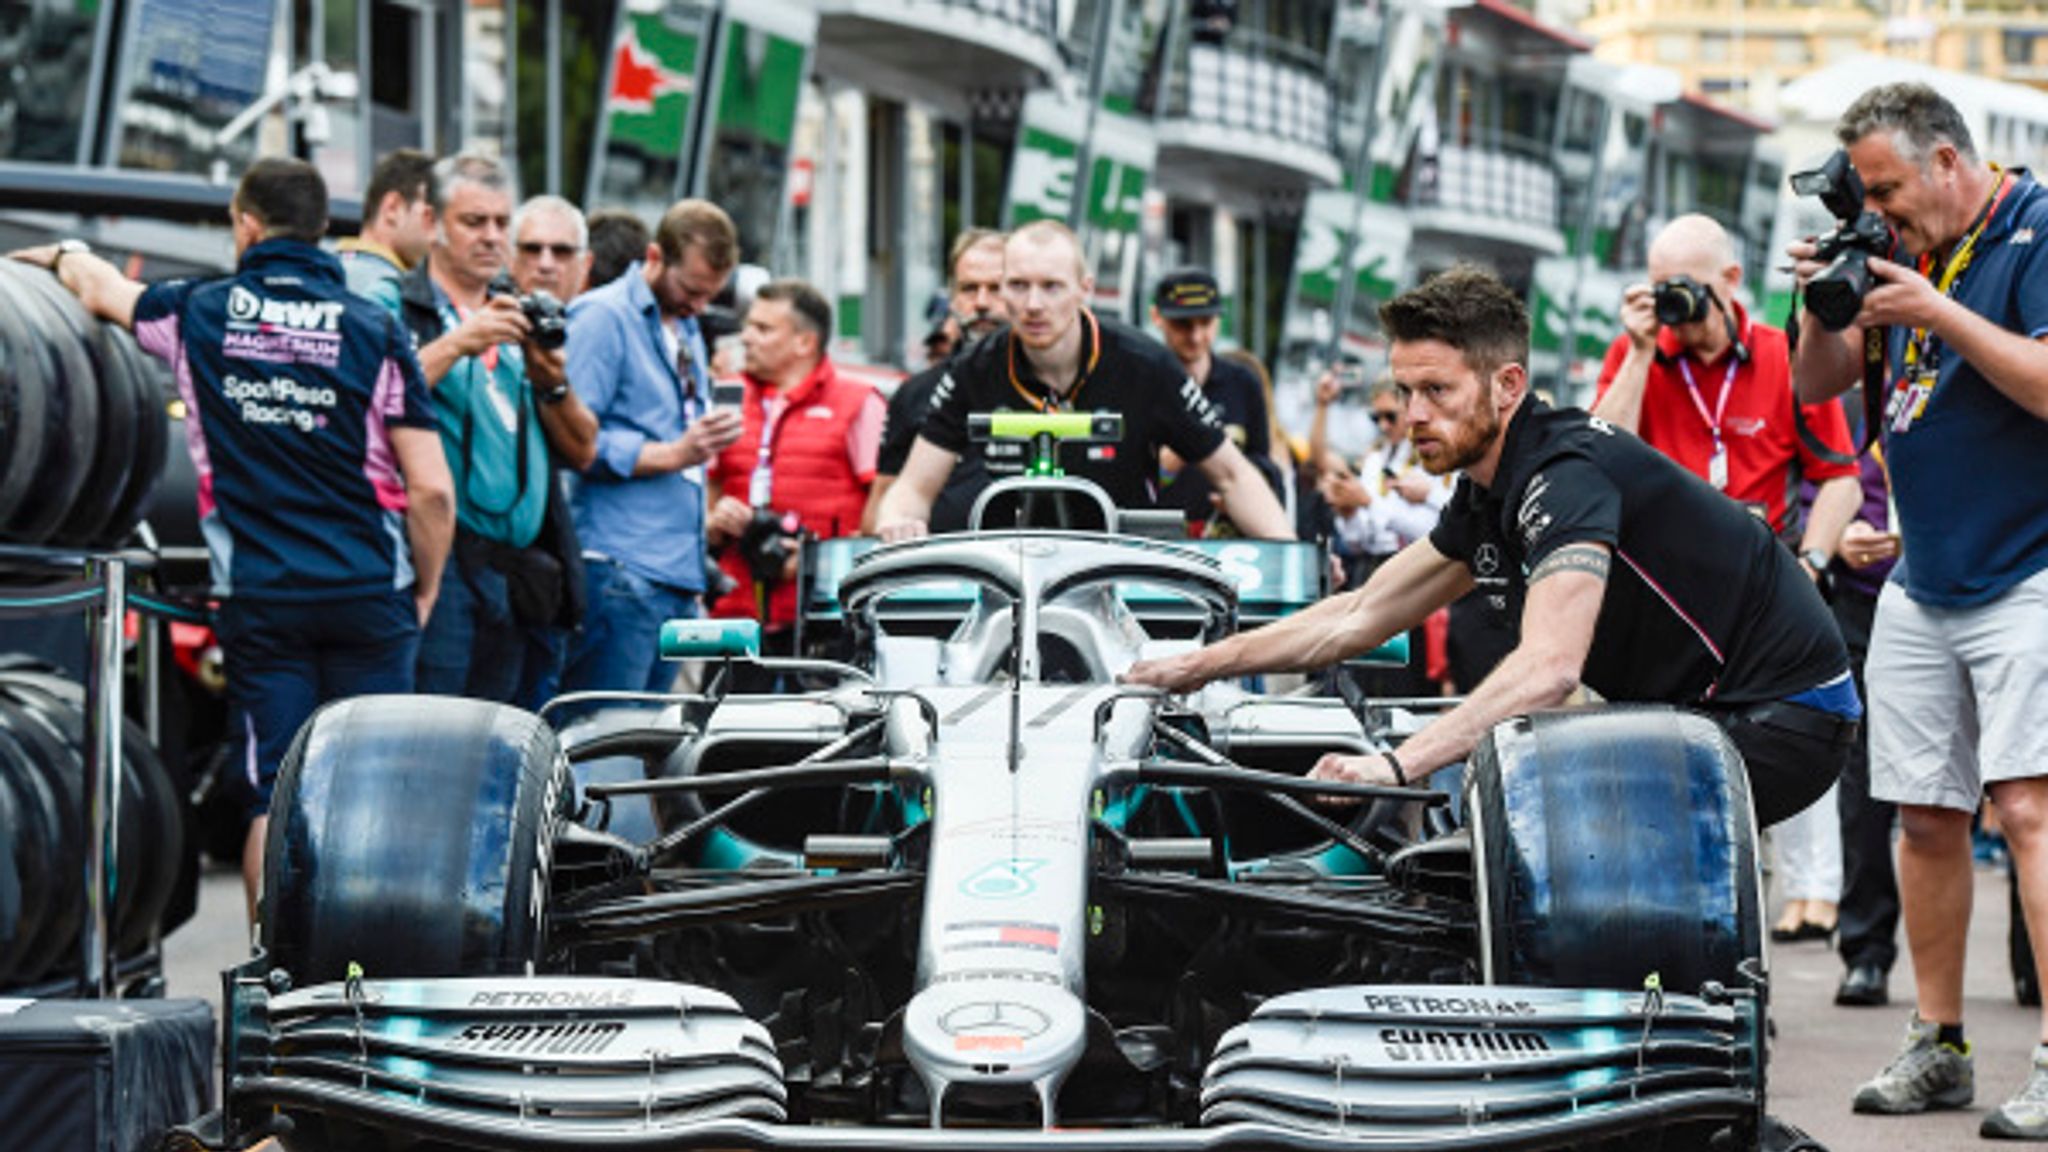 Monaco GP Mercedes, Ferrari and Red Bull on the battle for victory F1 News